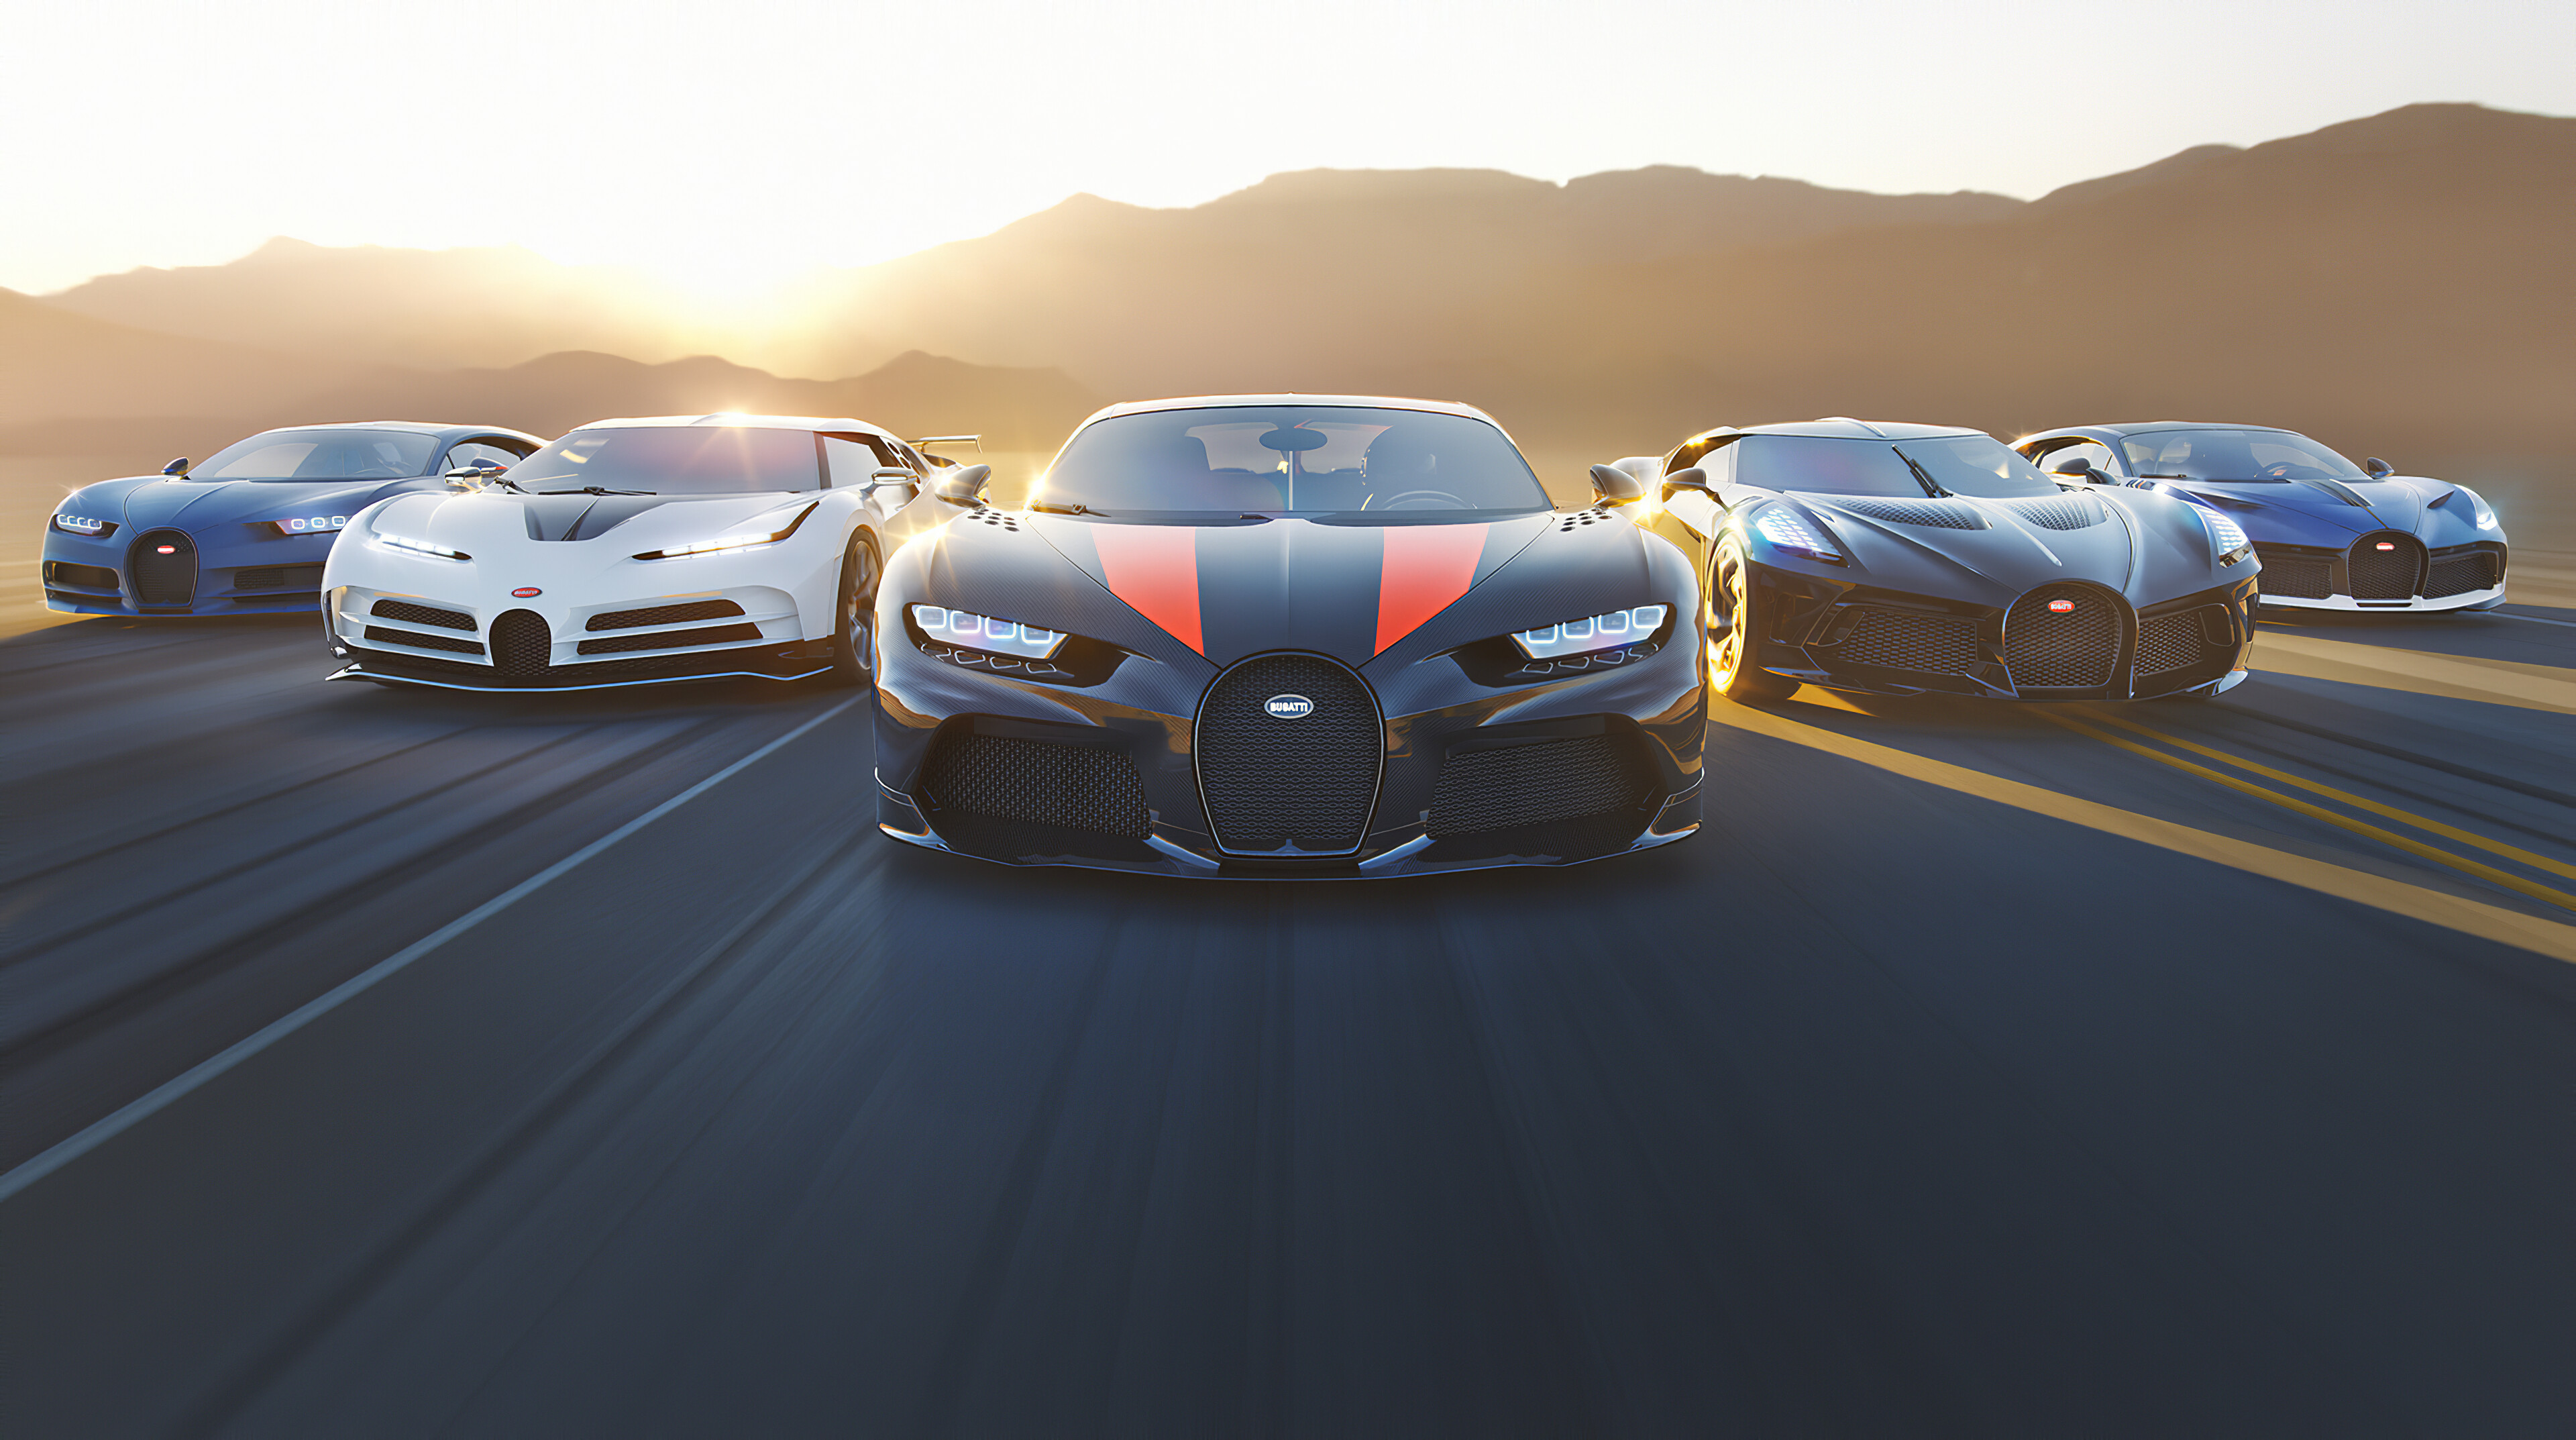 Bugatti: The brand's automobiles include the Type 35 Grand Prix cars, the Type 41 "Royale", and the Type 55 sports car. 3840x2150 HD Background.